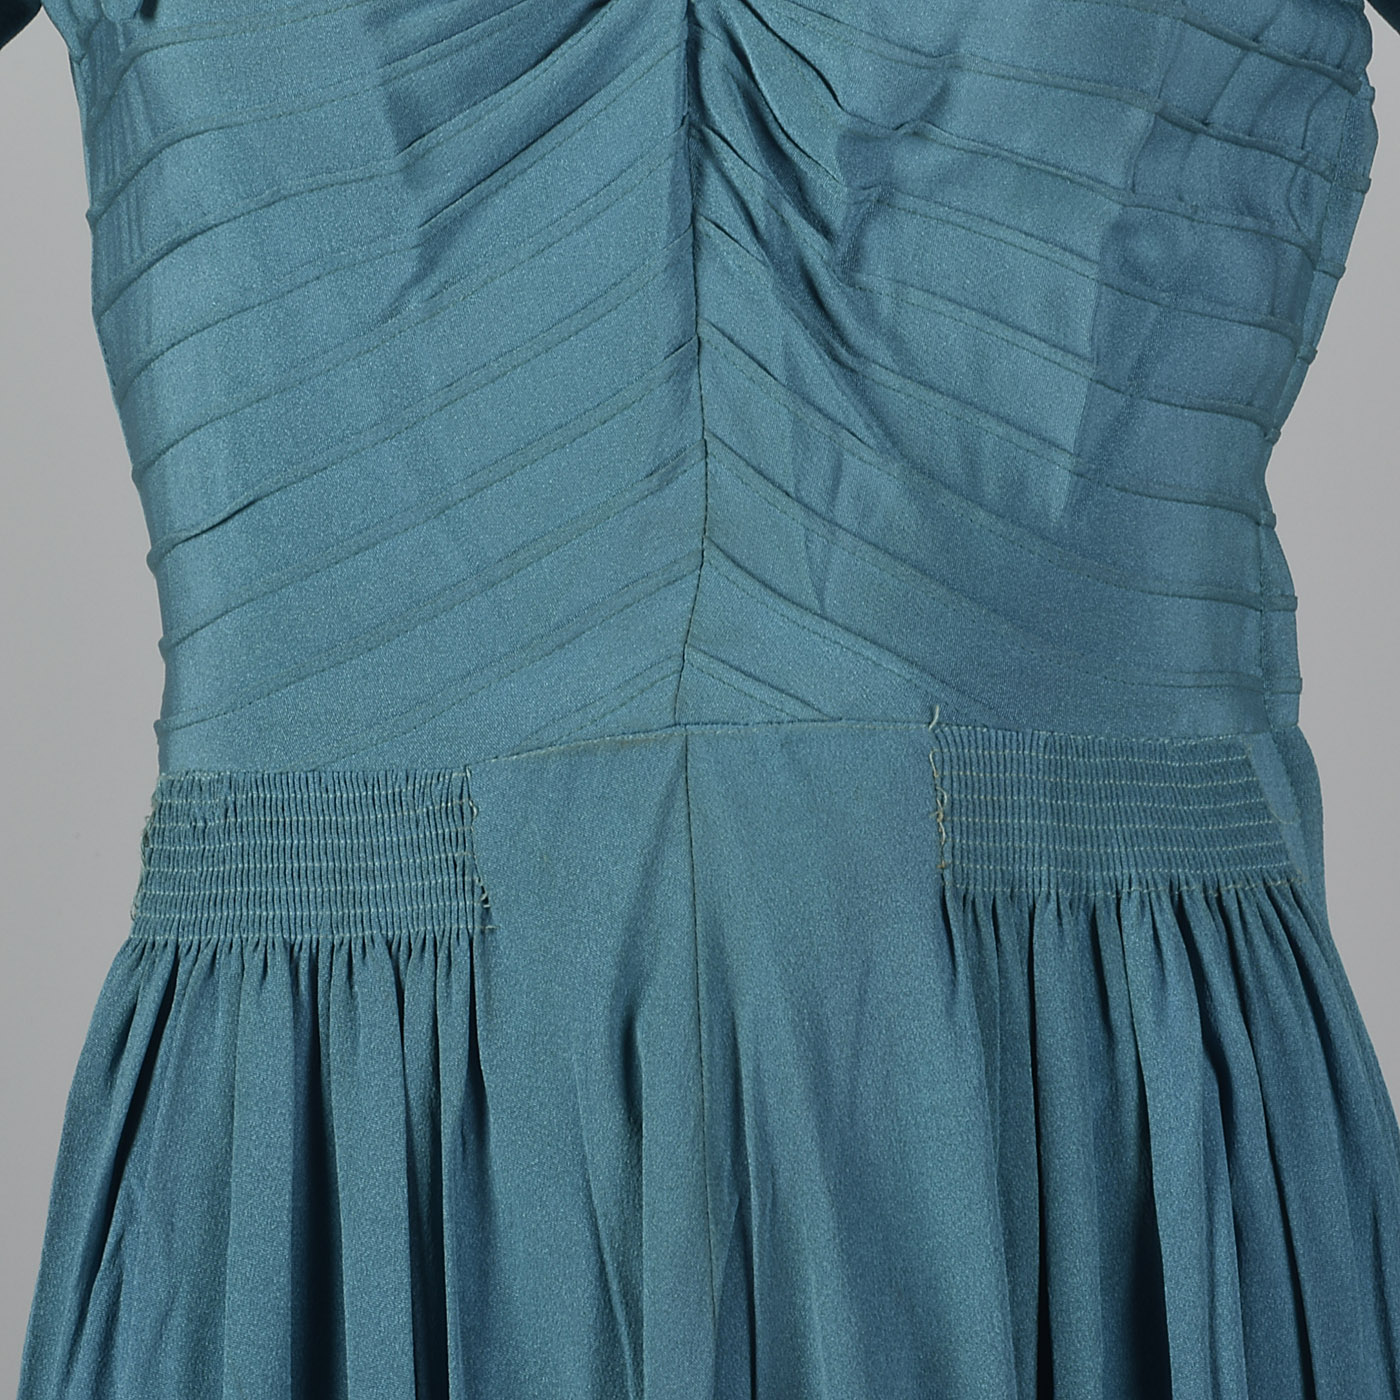 1940s Teal Rayon Dress with Neck Tie